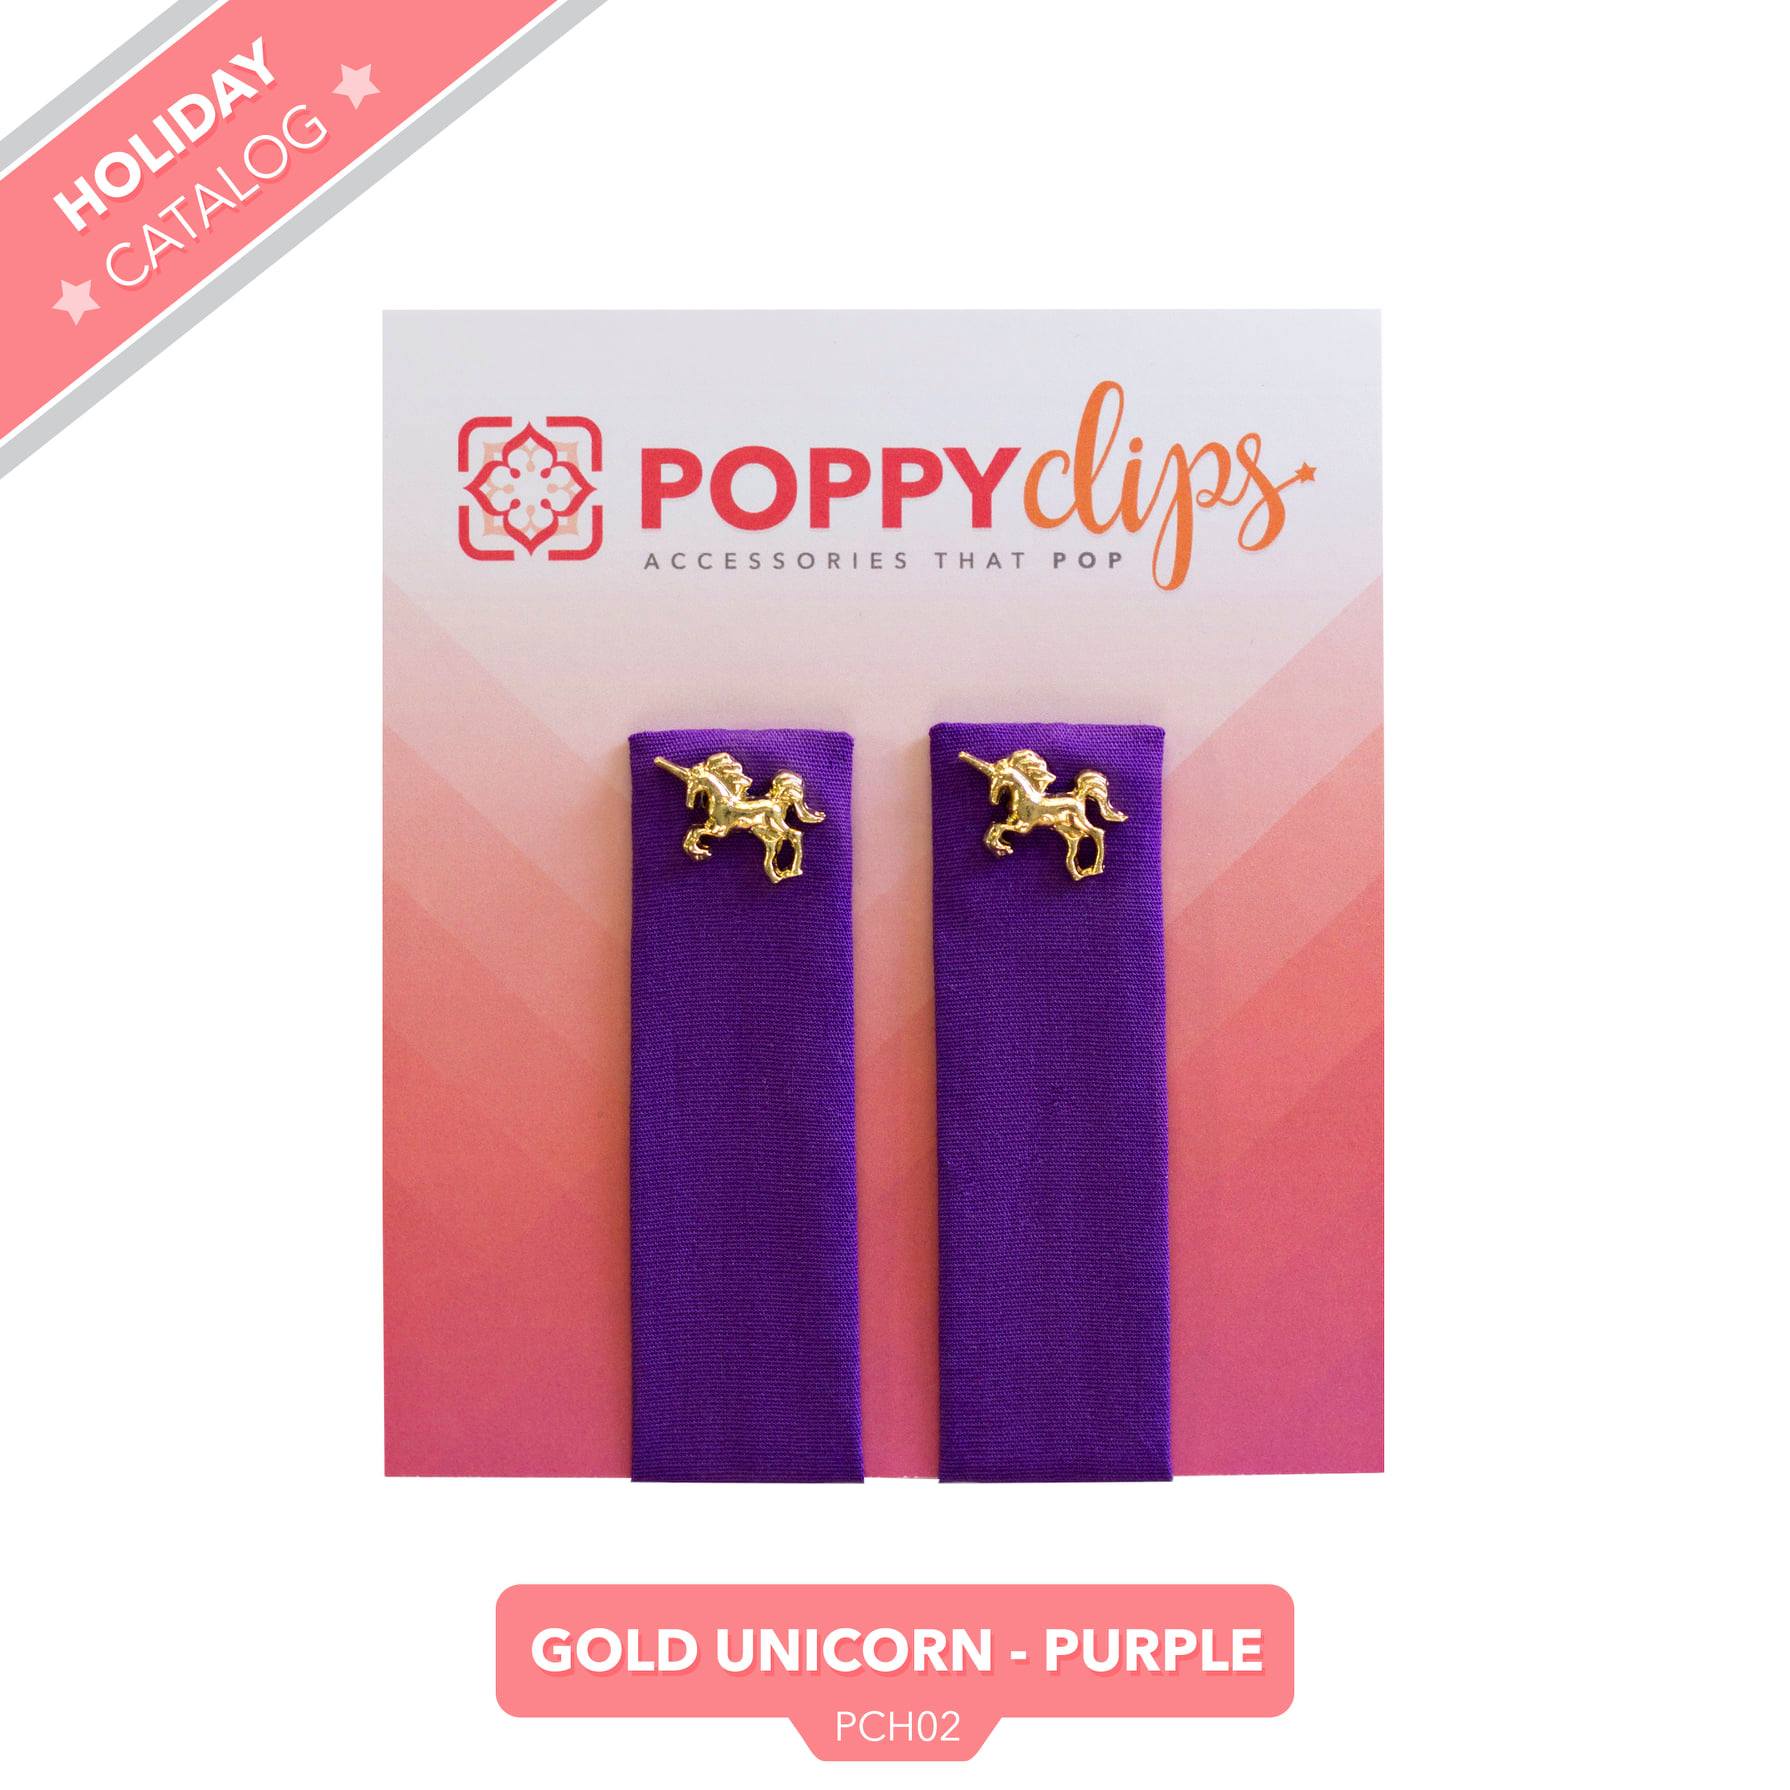 Two 5 ¼” long by 7/8” wide purple material with a magnet at each end.  The outer magnet is a decorative gold unicorn. 